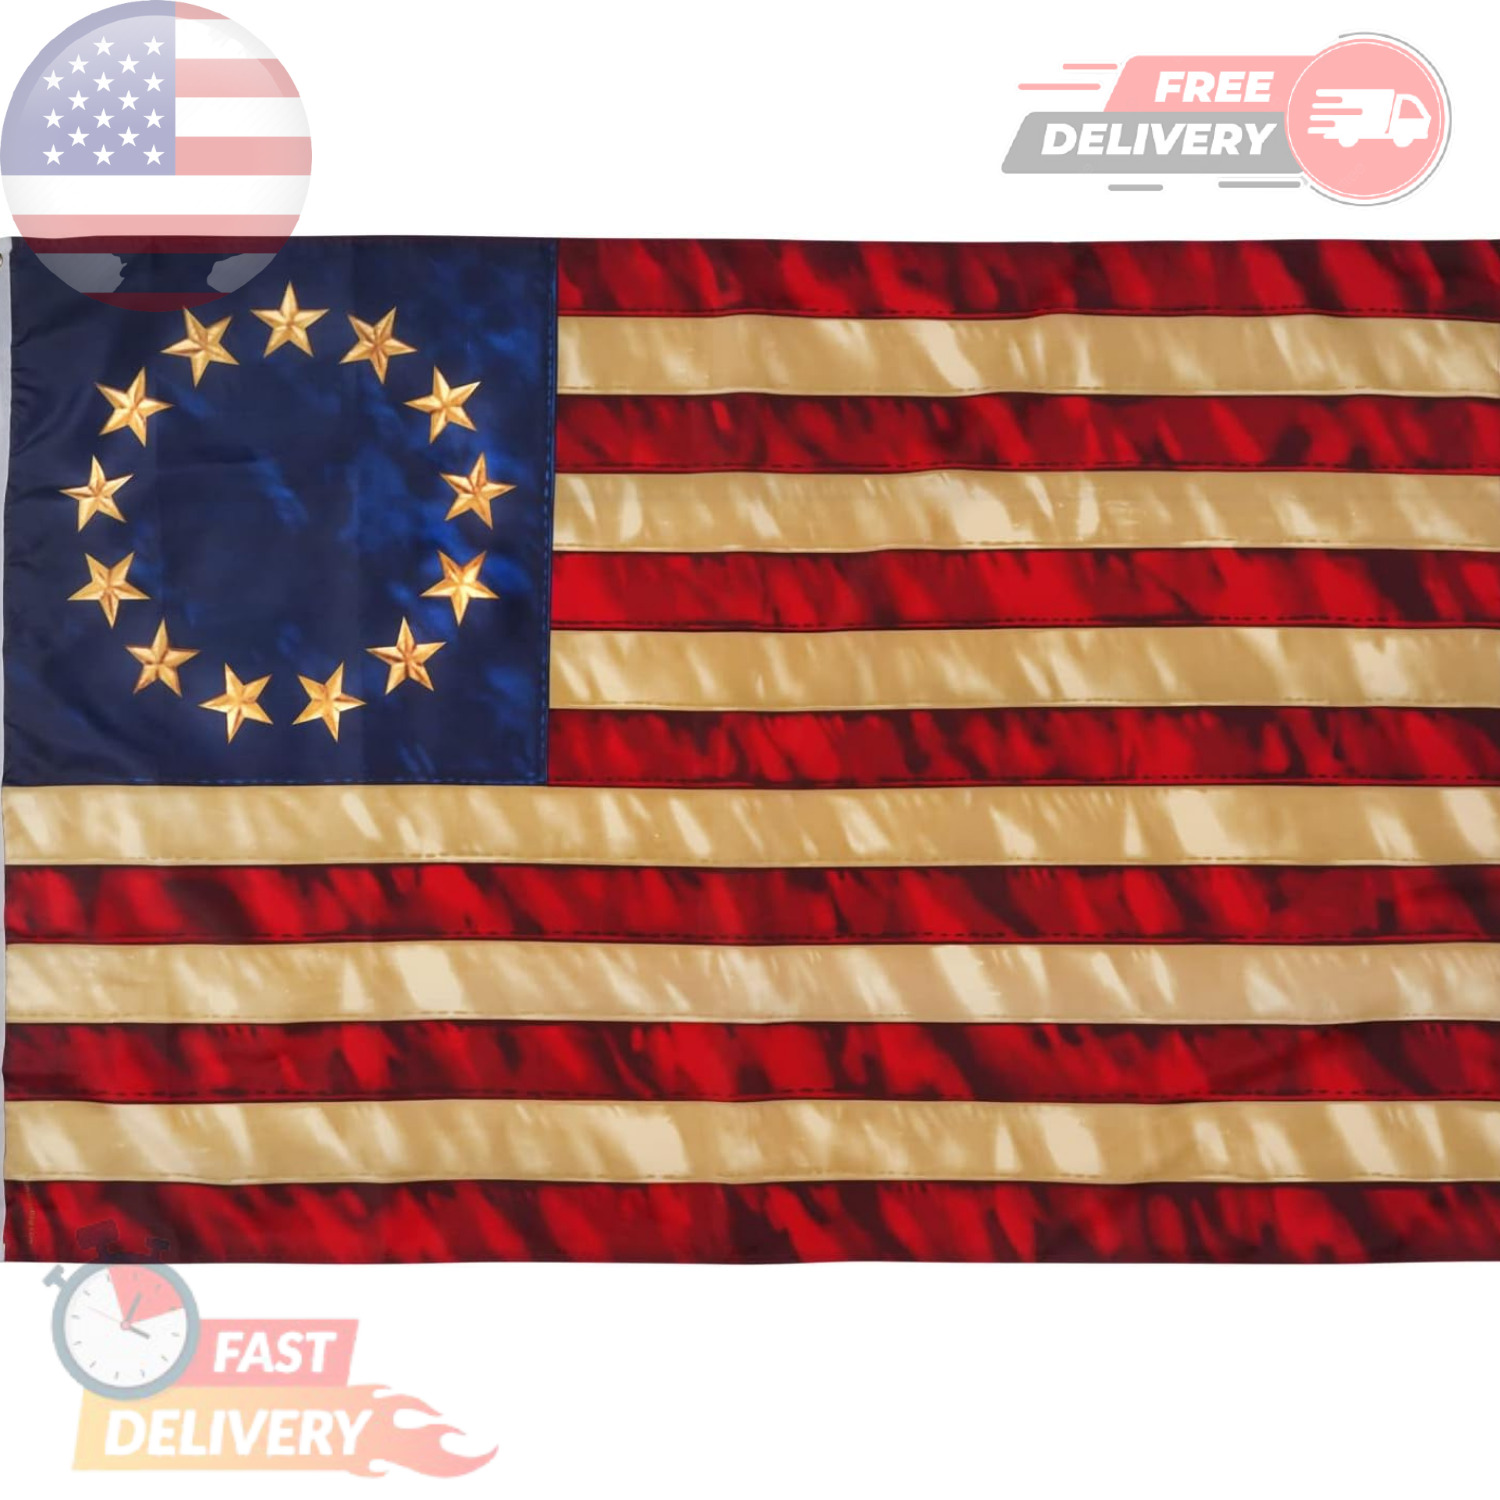 Anley Vintage Style Tea Stained Betsy Ross Flag 3x5 Ft Nylon Antiqued USA Banner